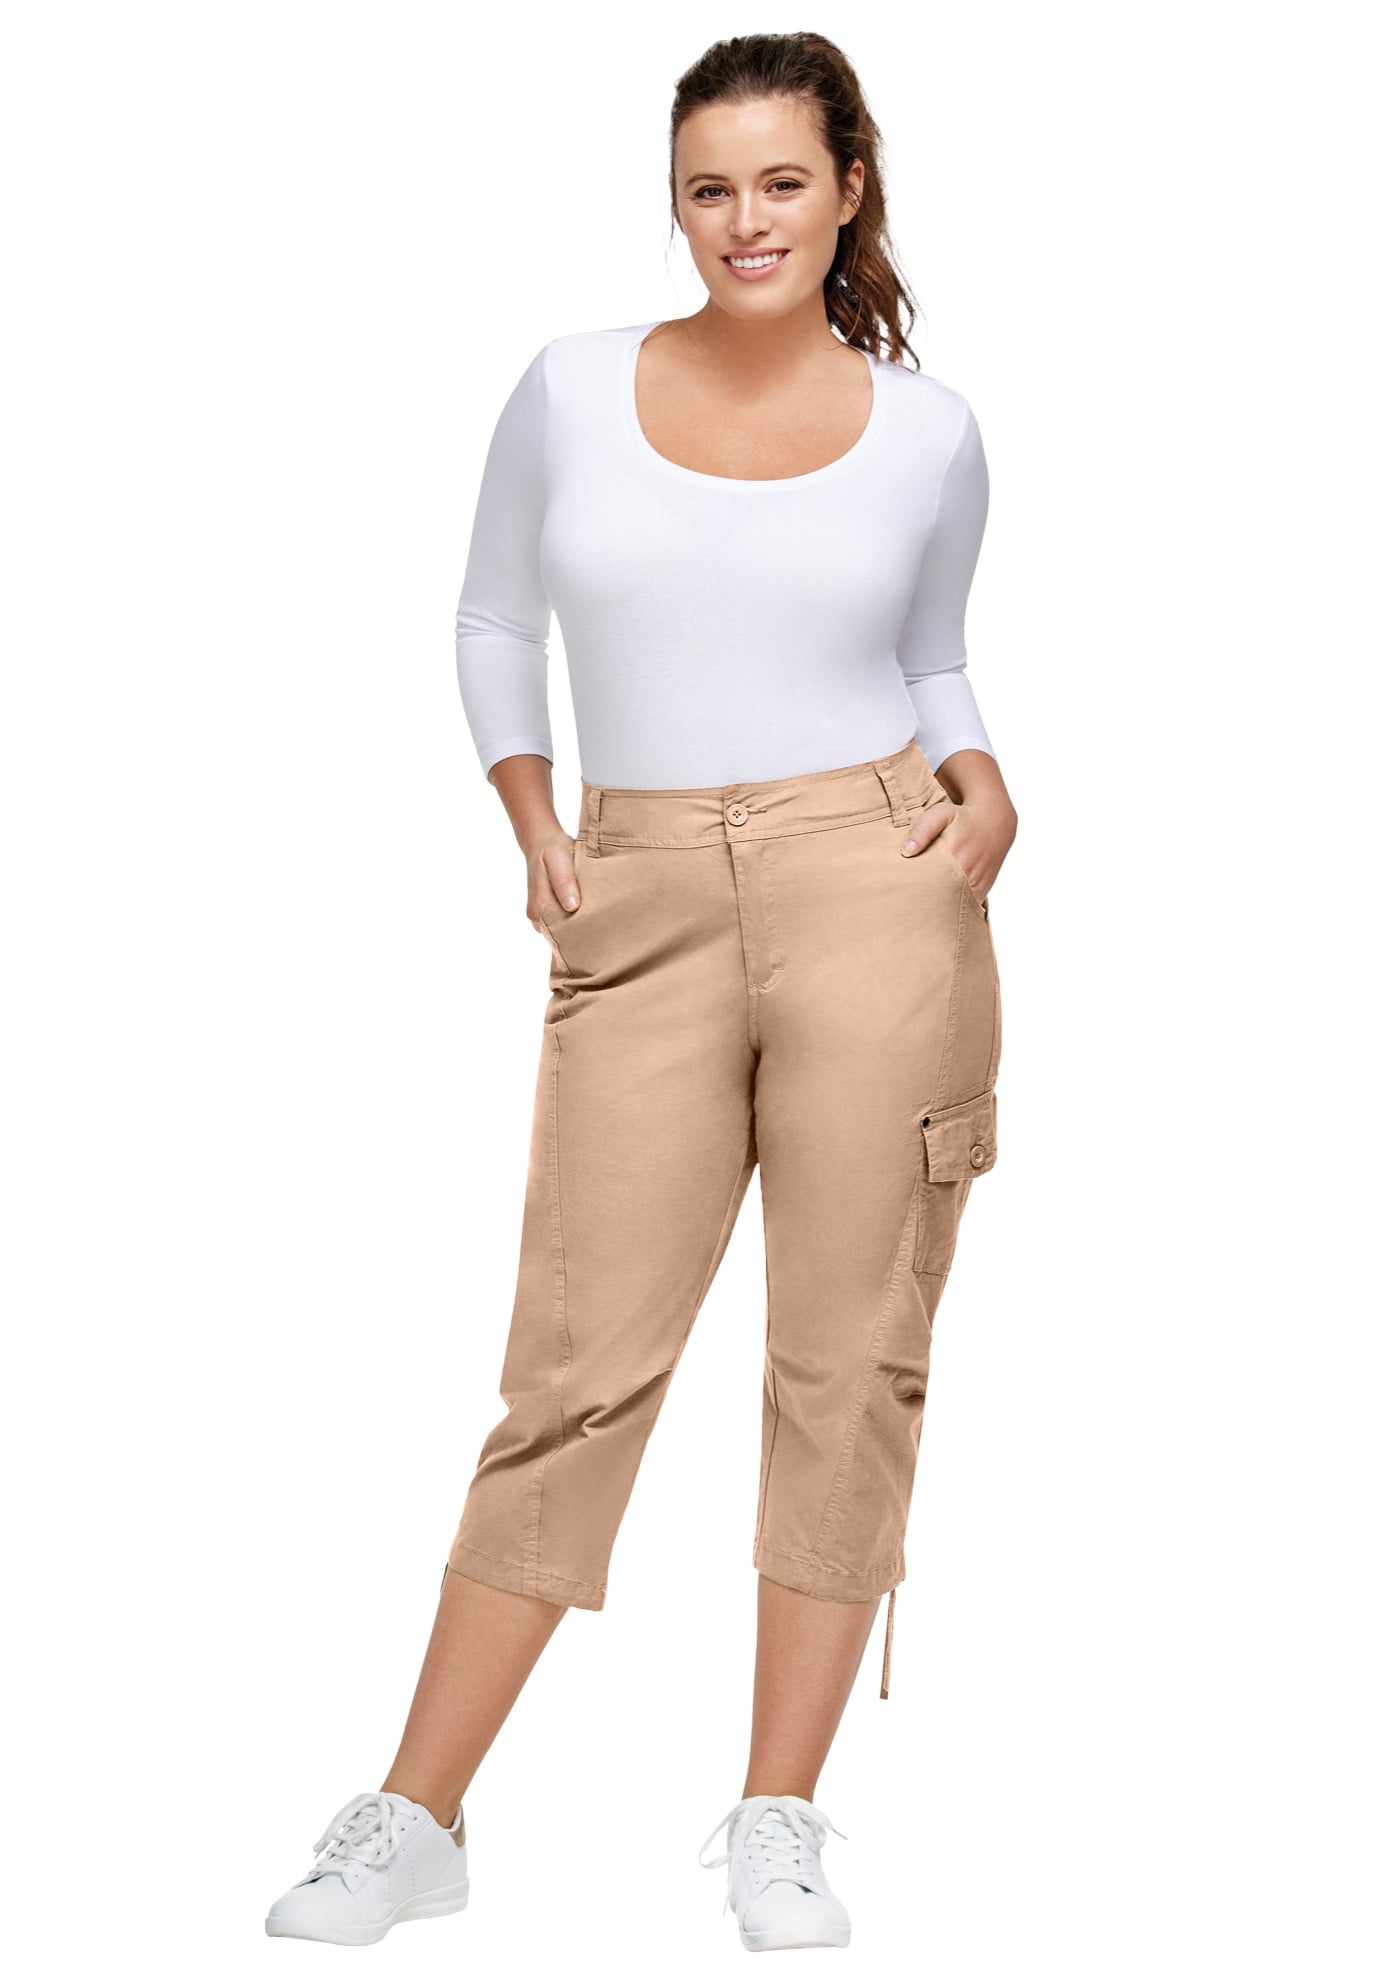 Ellos Women's Plus Size Stretch Cargo Capris Front and Side Pockets Casual  Cropped Pants - 16, New Khaki Beige 